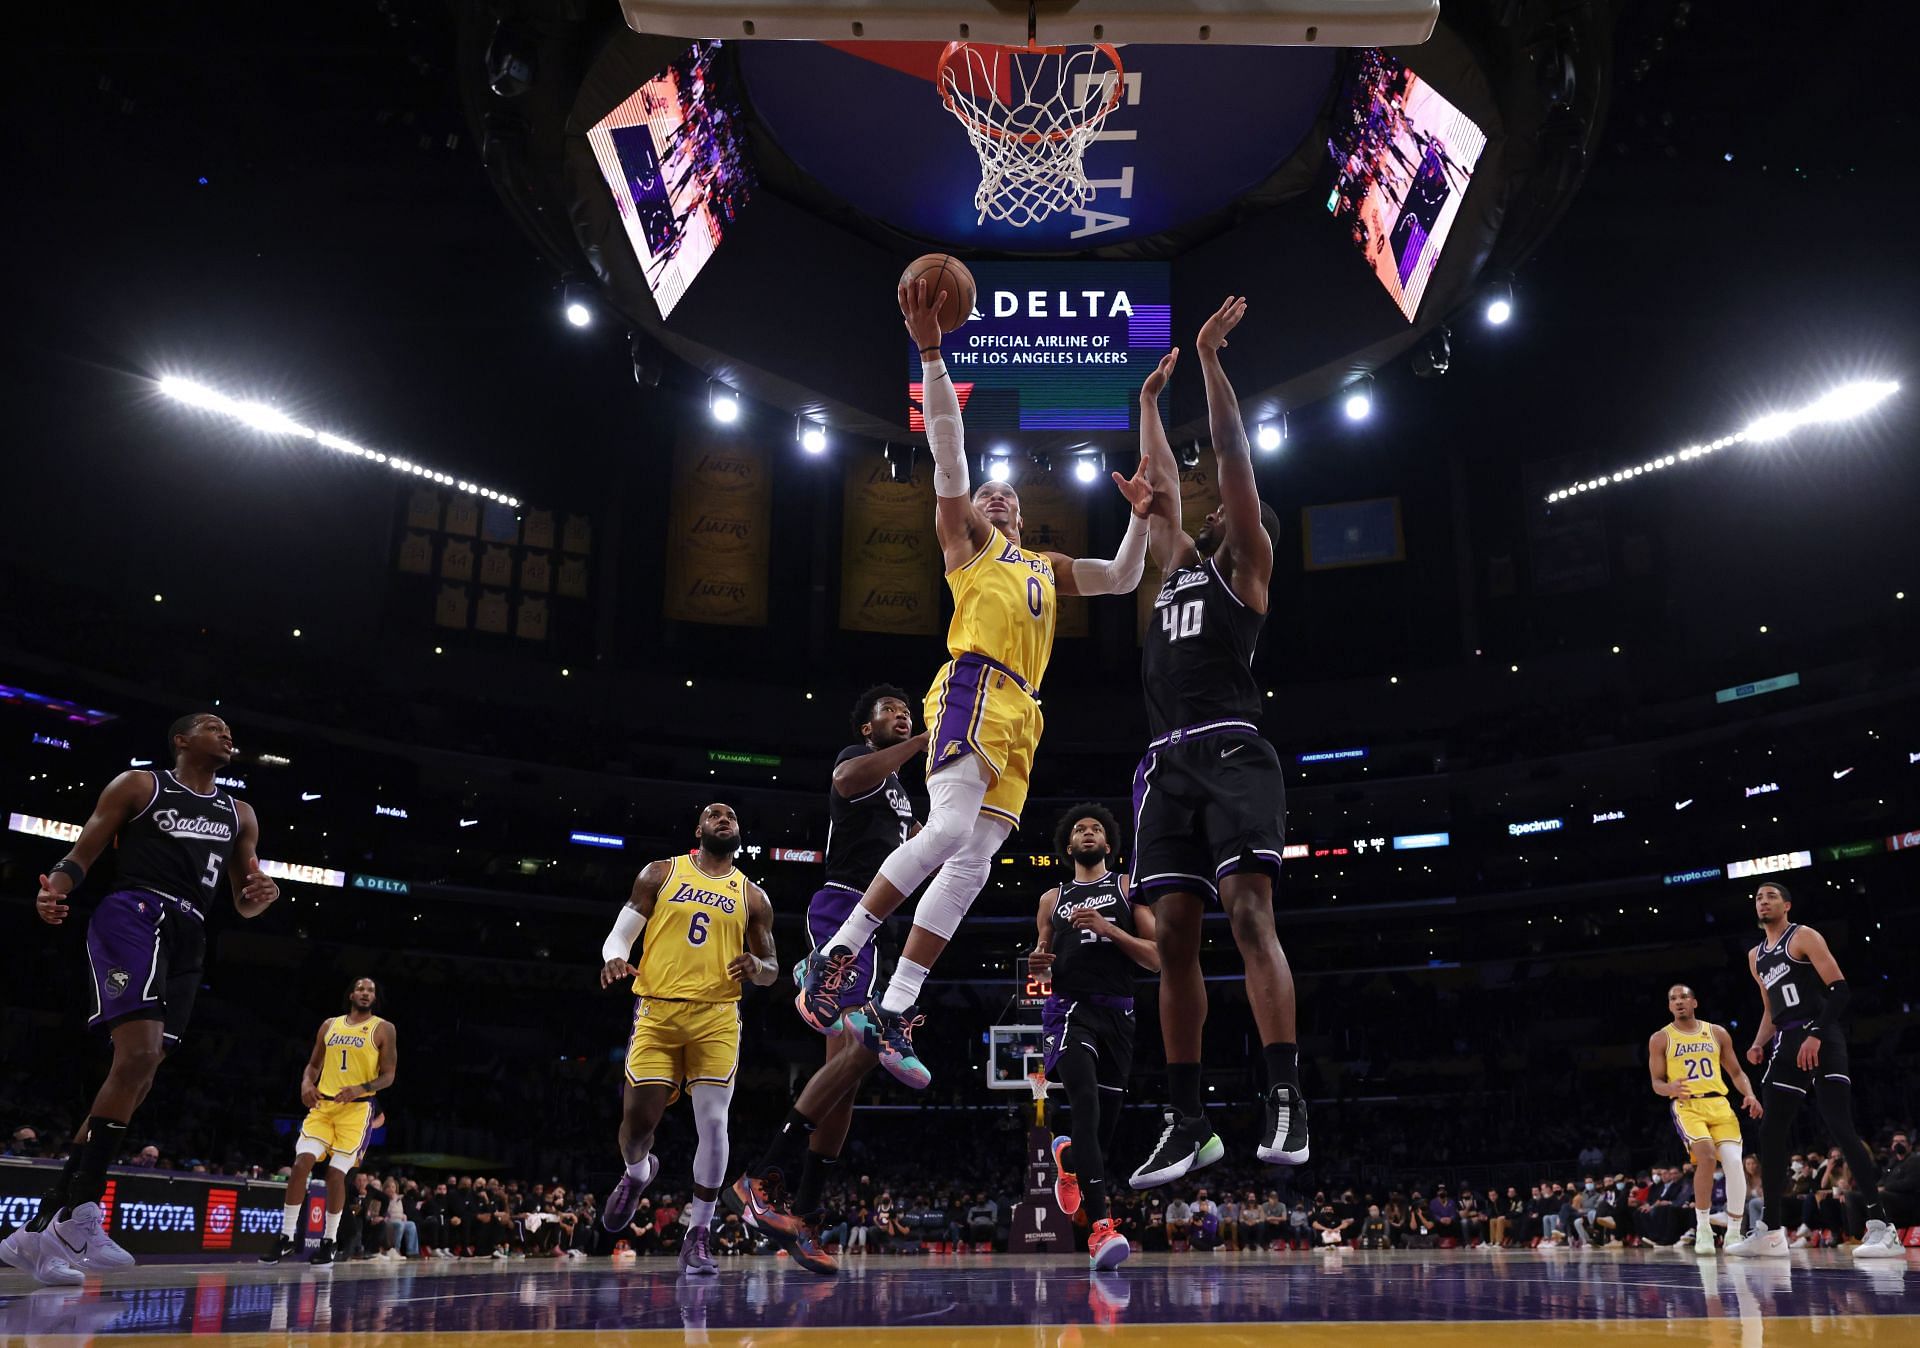 LA Lakers guard Russell Westbrook driving for a layup